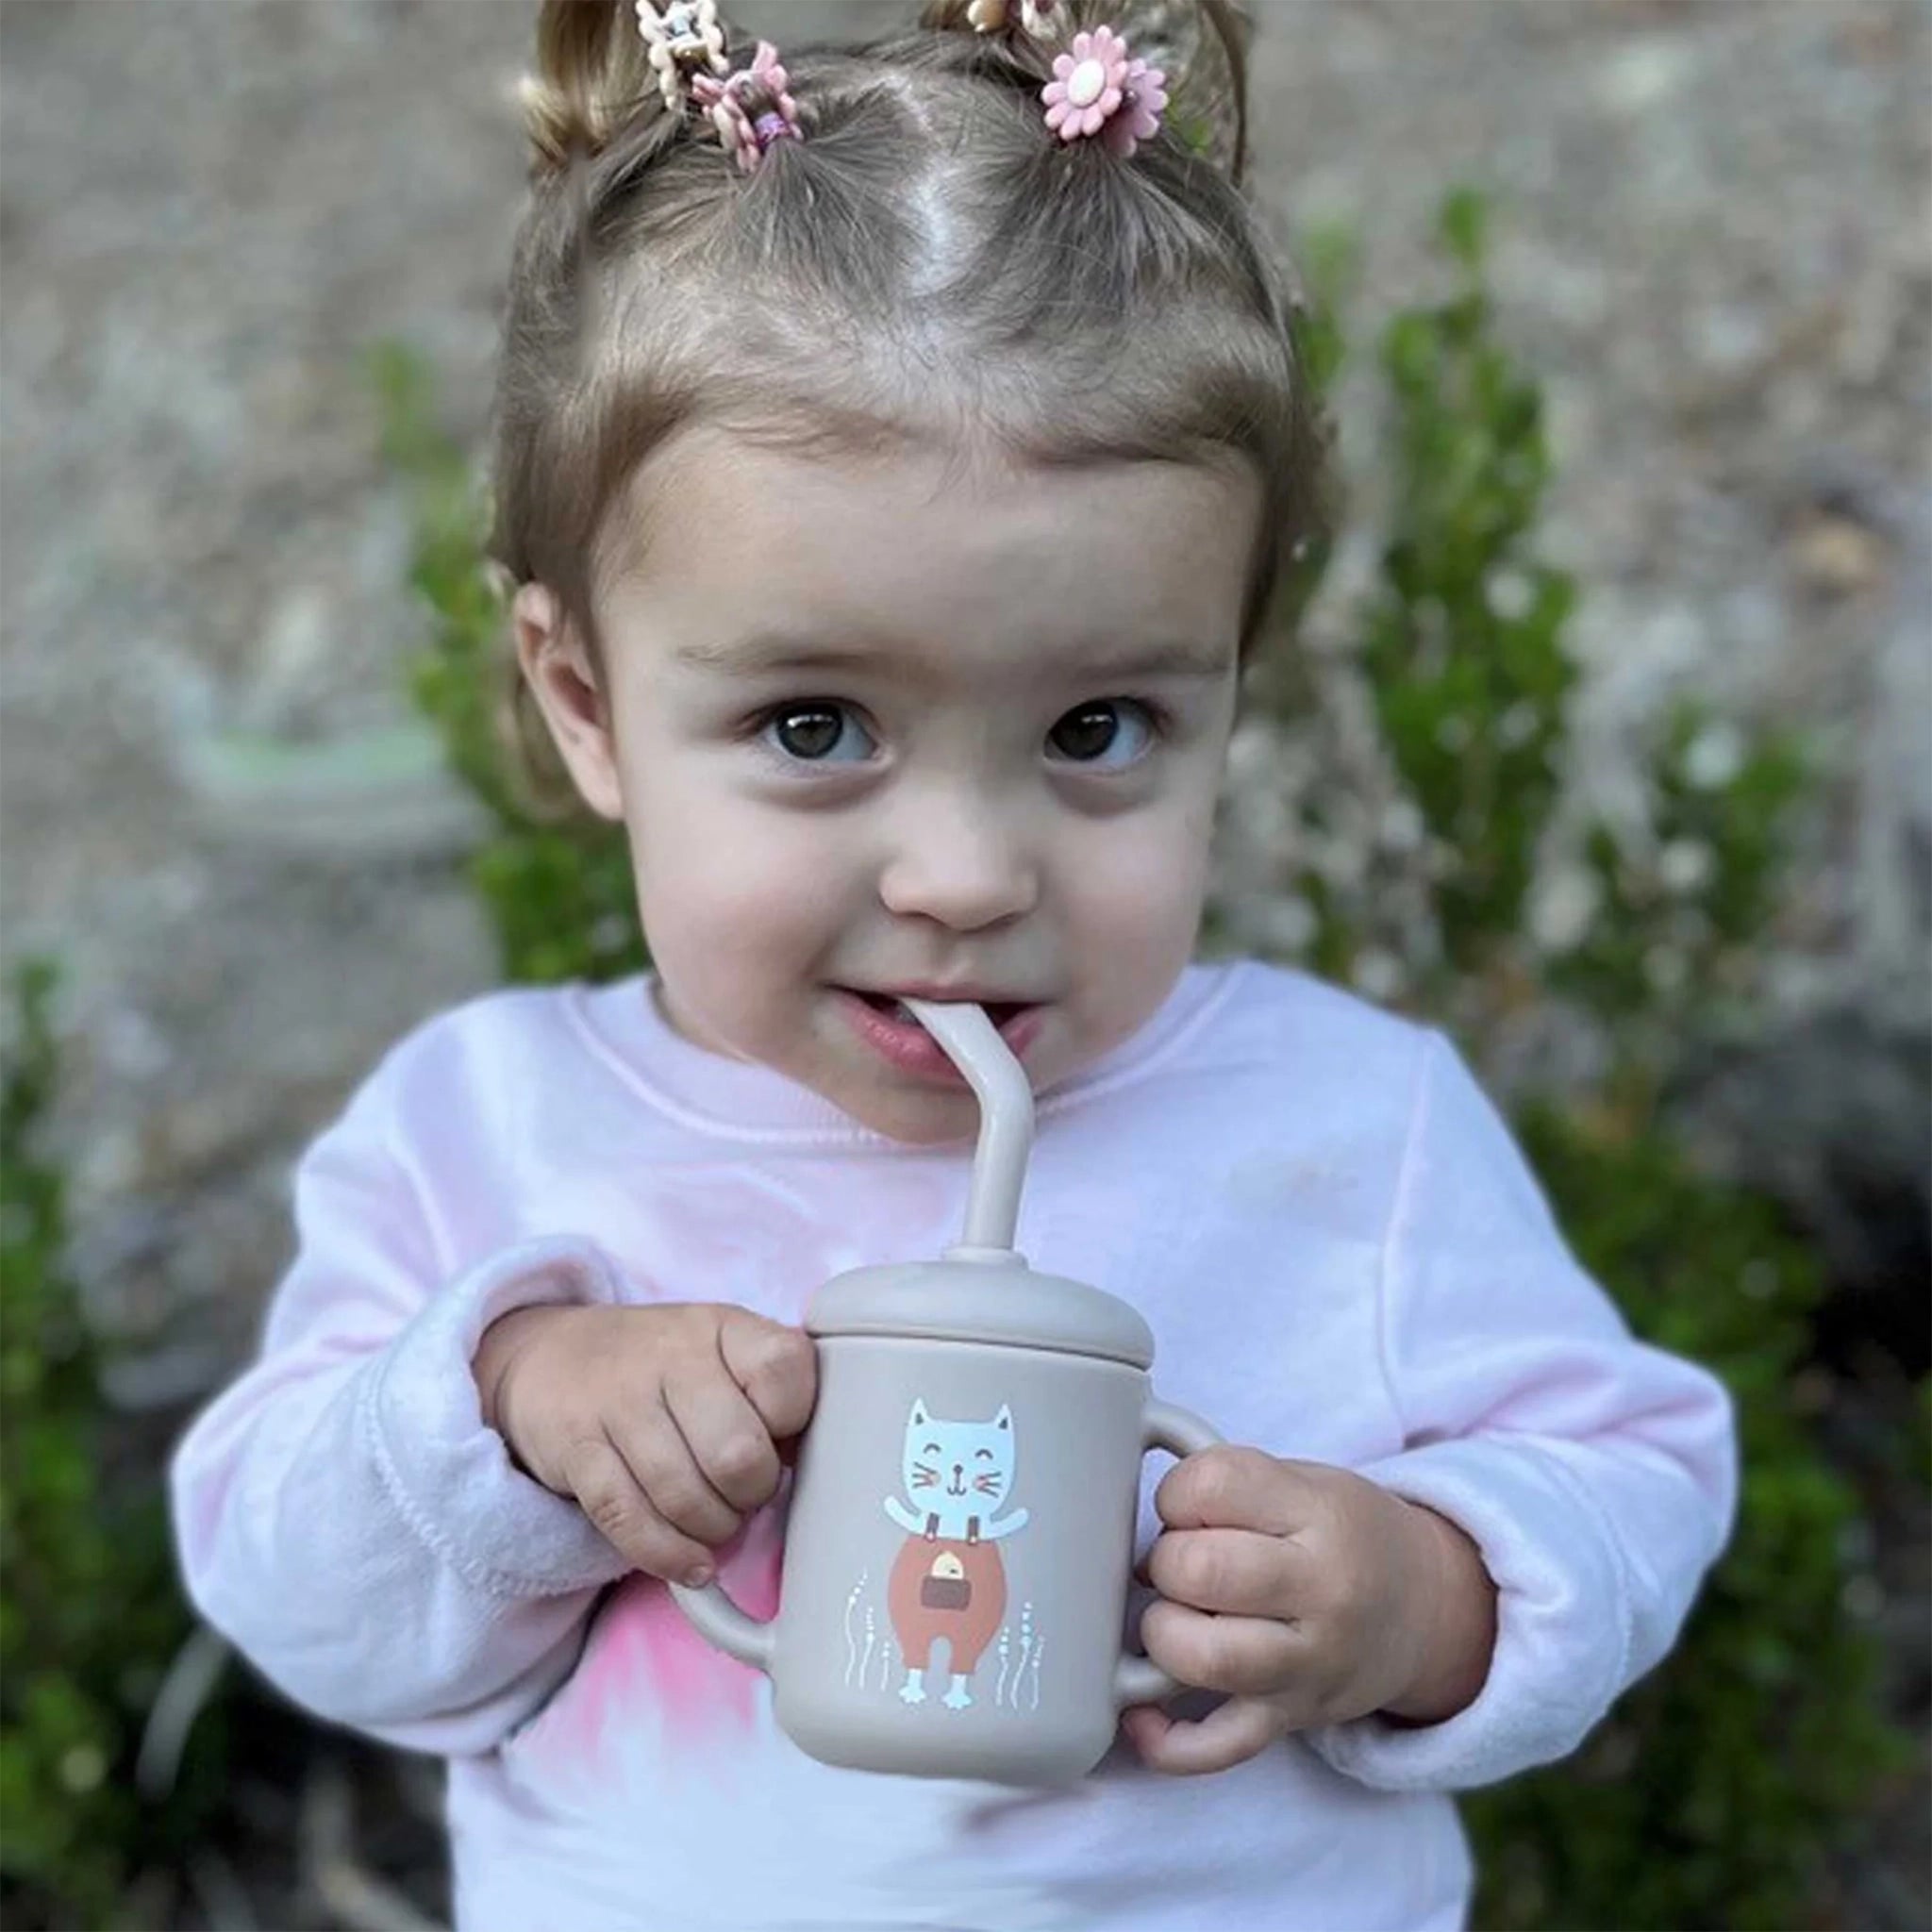 Sippy Cup Tumbler | Sippy Cup | Toddler Tumbler | Baby Cup | 12oz.